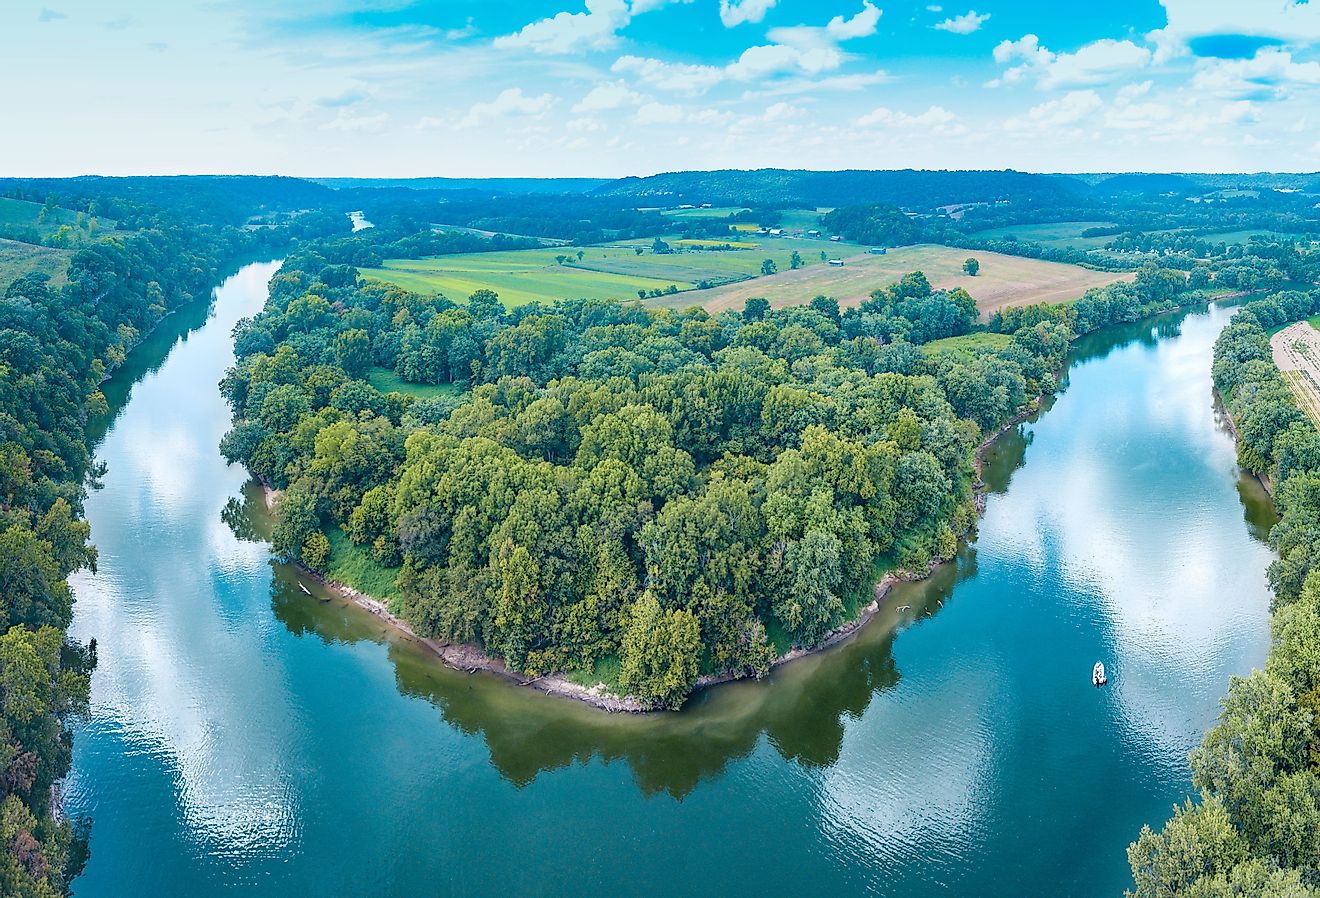 An aerial view panorama of the Kentucky river with a boat on the water. Image credit Cade Nathaniel Nicholson via Shutterstock.